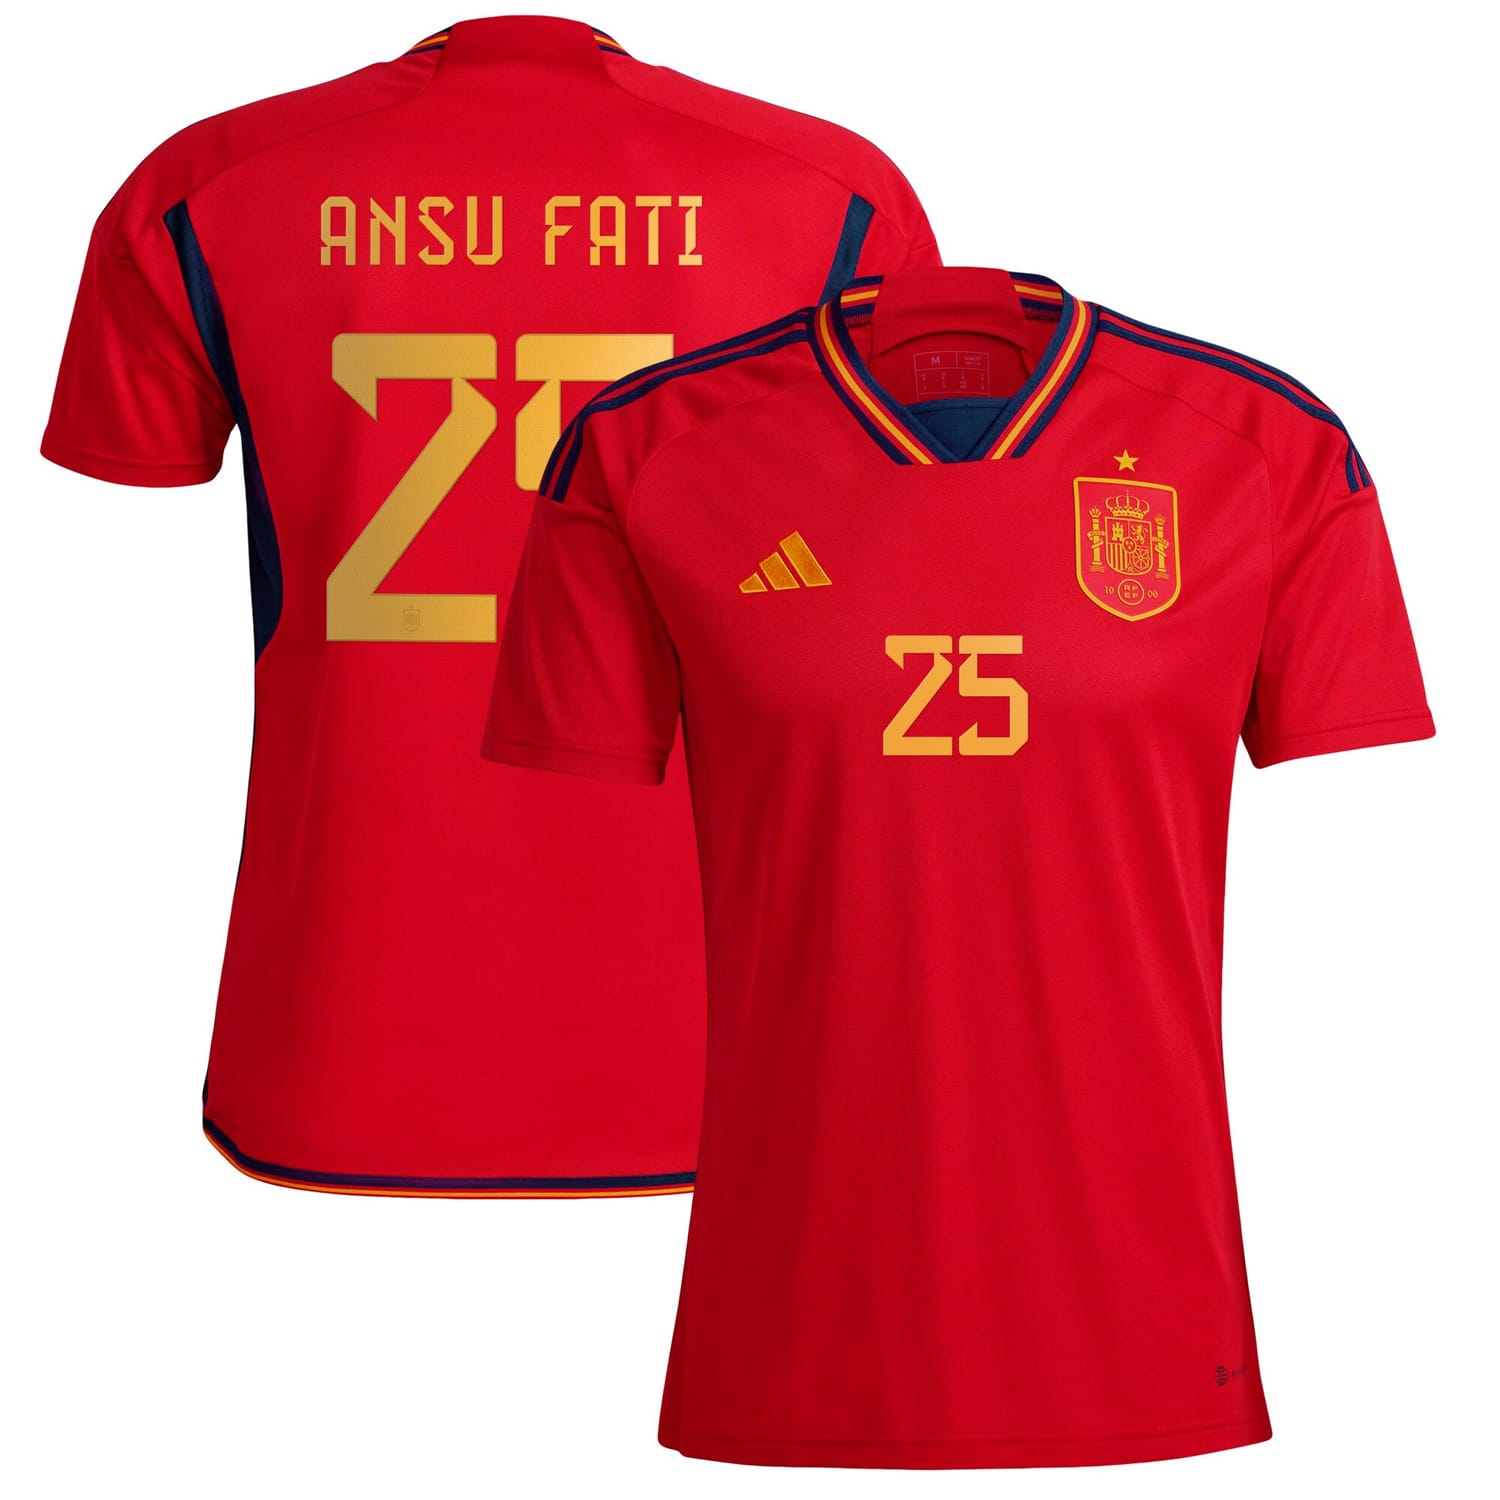 Spain National Team Home Jersey Shirt Red 2022-23 player Ansu Fati printing for Men